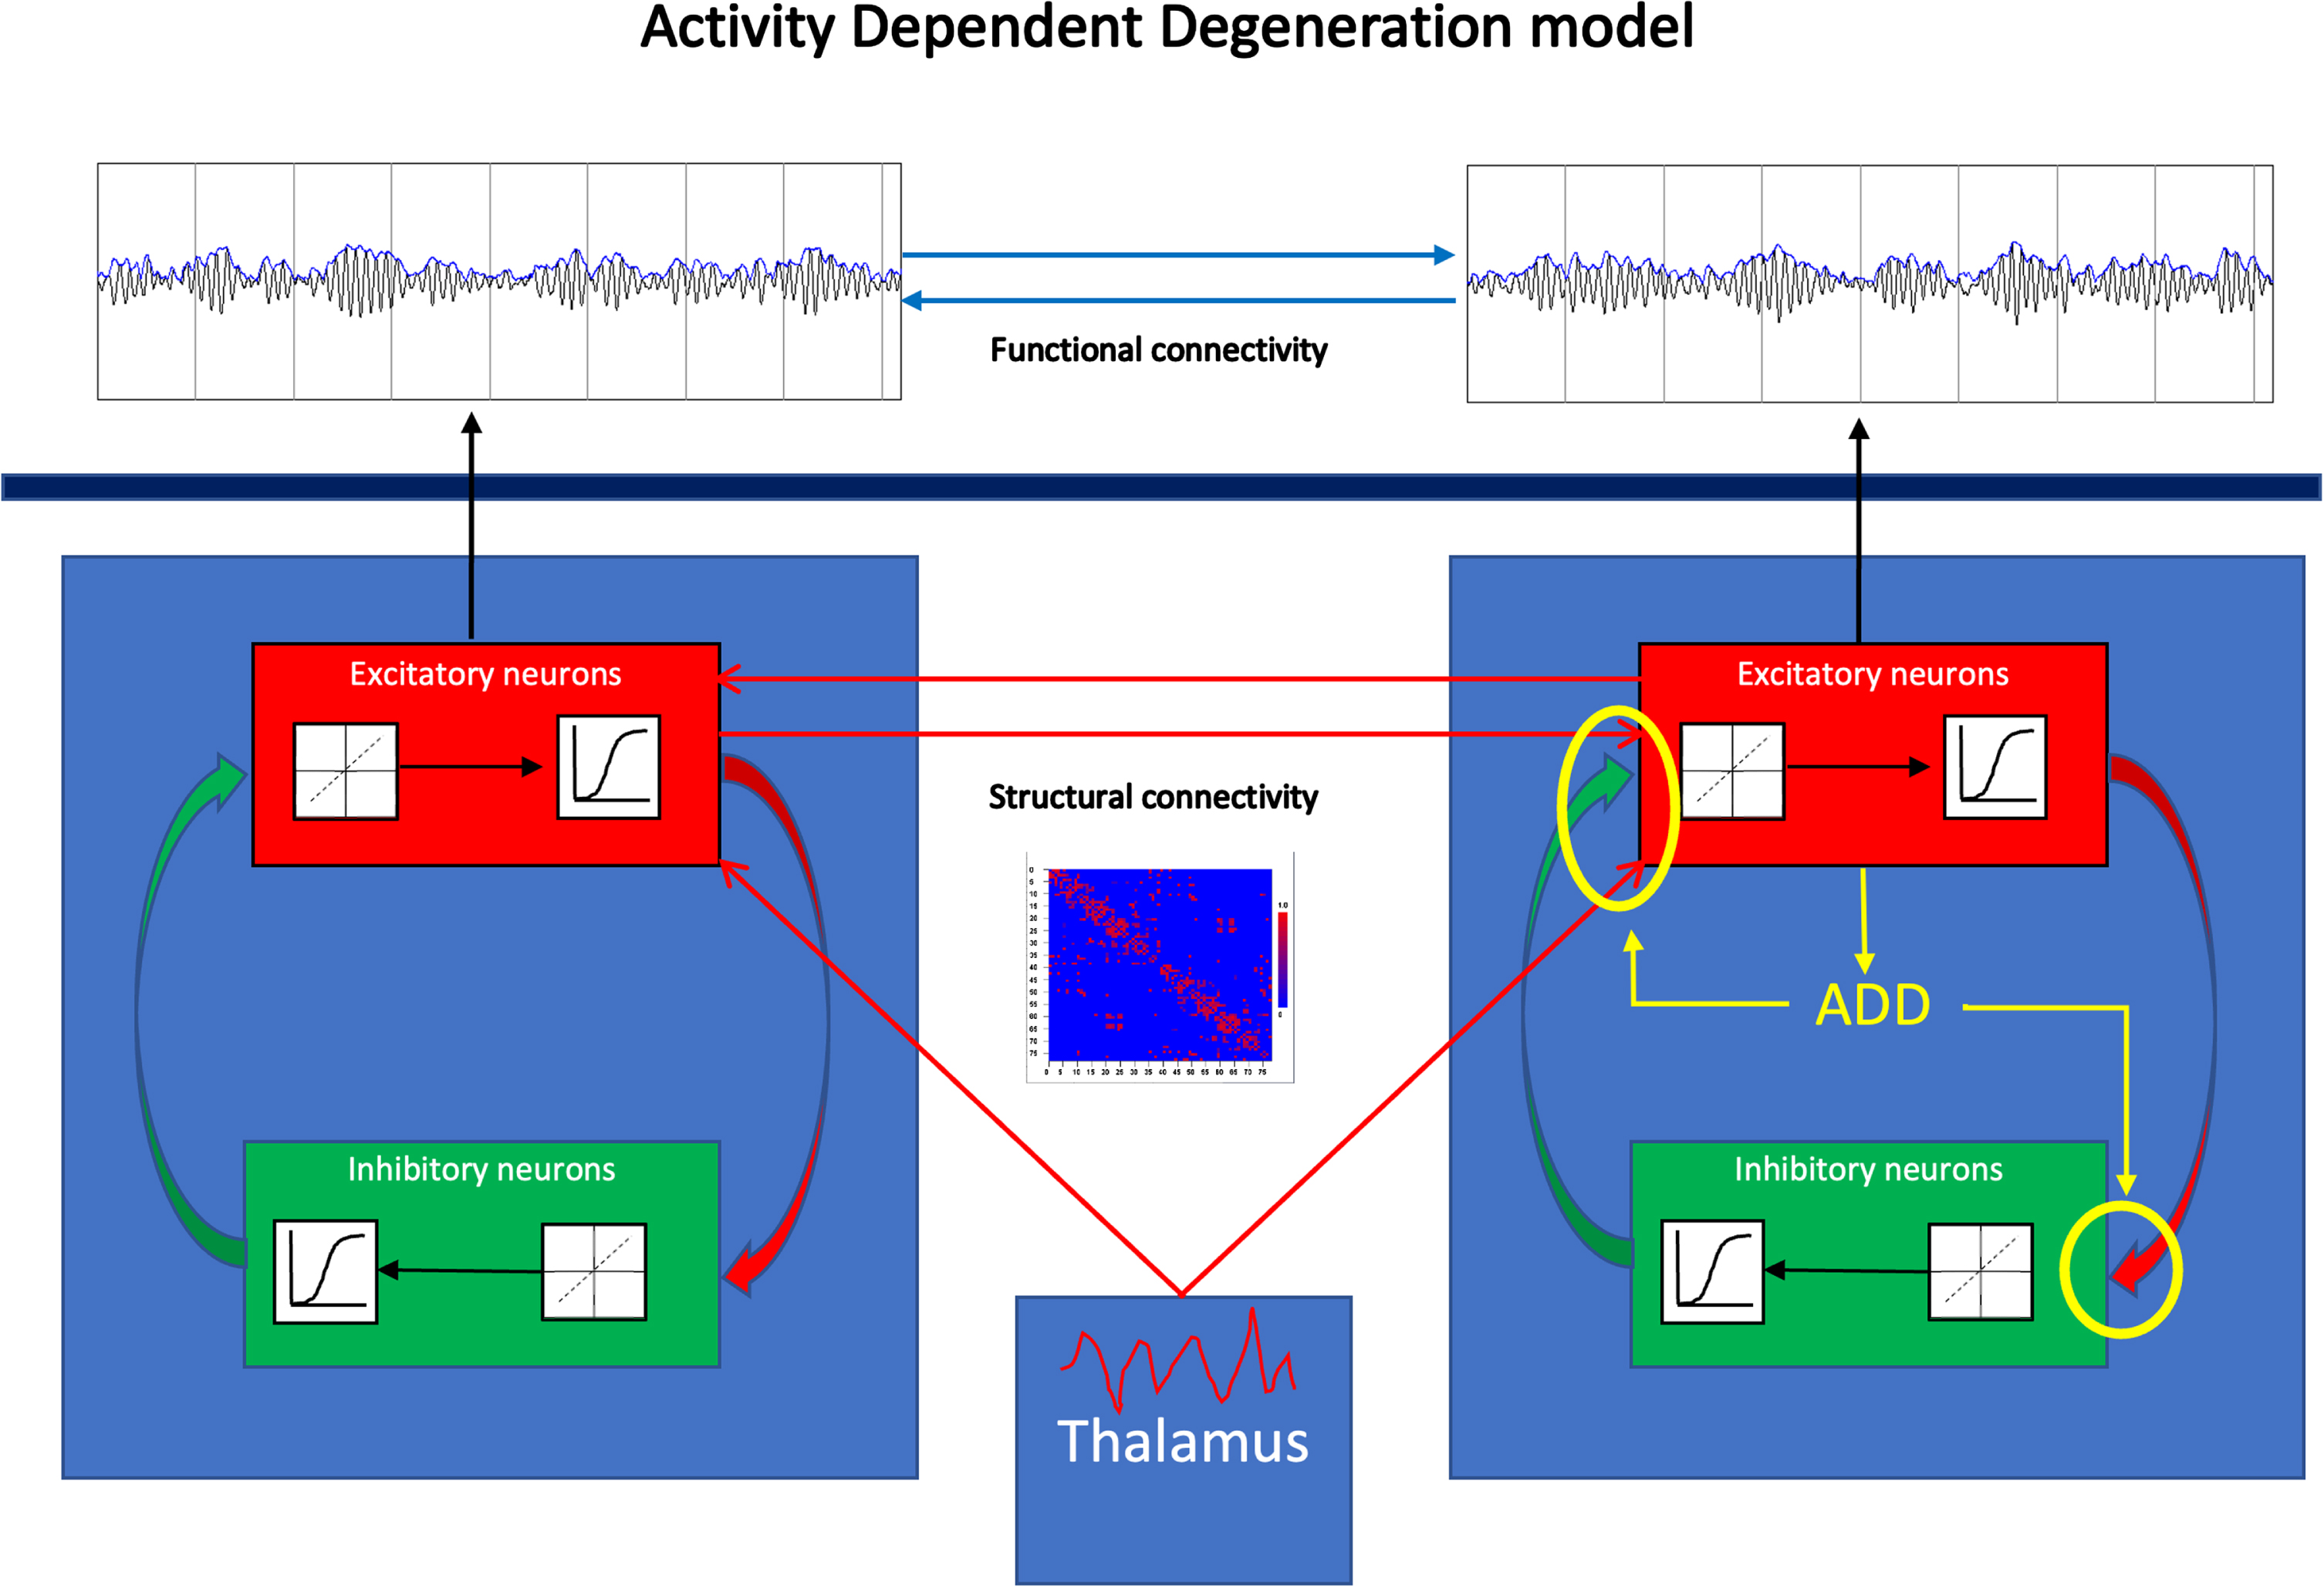 General scheme of the activity dependent degeneration (ADD) model. The brain is modeled as a network of coupled brain regions. The activity of each brain region, corresponding to the two blue squares to the left and the right, is described by a neural mass model. This considers the average activity (mean membrane potential and mean firing rates in spikes/s) of reciprocally interconnected populations of excitatory and inhibitory neurons, indicated by the red and green boxes within the larger blue boxes. Within each population incoming action potentials are converted to changes in mean membrane potential by a dynamic linear function. Membrane potentials are converted to spike densities by a static nonlinear (sigmoidal) function. Excitatory neurons of different brain regions are coupled to excitatory neurons of other brain regions, where the presence and strength of such connections is based upon an underlying structural connections matrix (example shown in the middle of the figure). All brain regions receive excitatory input to their excitatory neurons from the thalamus. The output of the model consists of time series of membrane potentials of the excitatory population of each of the brain regions. As shown in yellow in the right brain region ADD is implemented by coupling the firing rates of the excitatory population to weakening of all synapses, excitatory as well as inhibitory, present in the system.